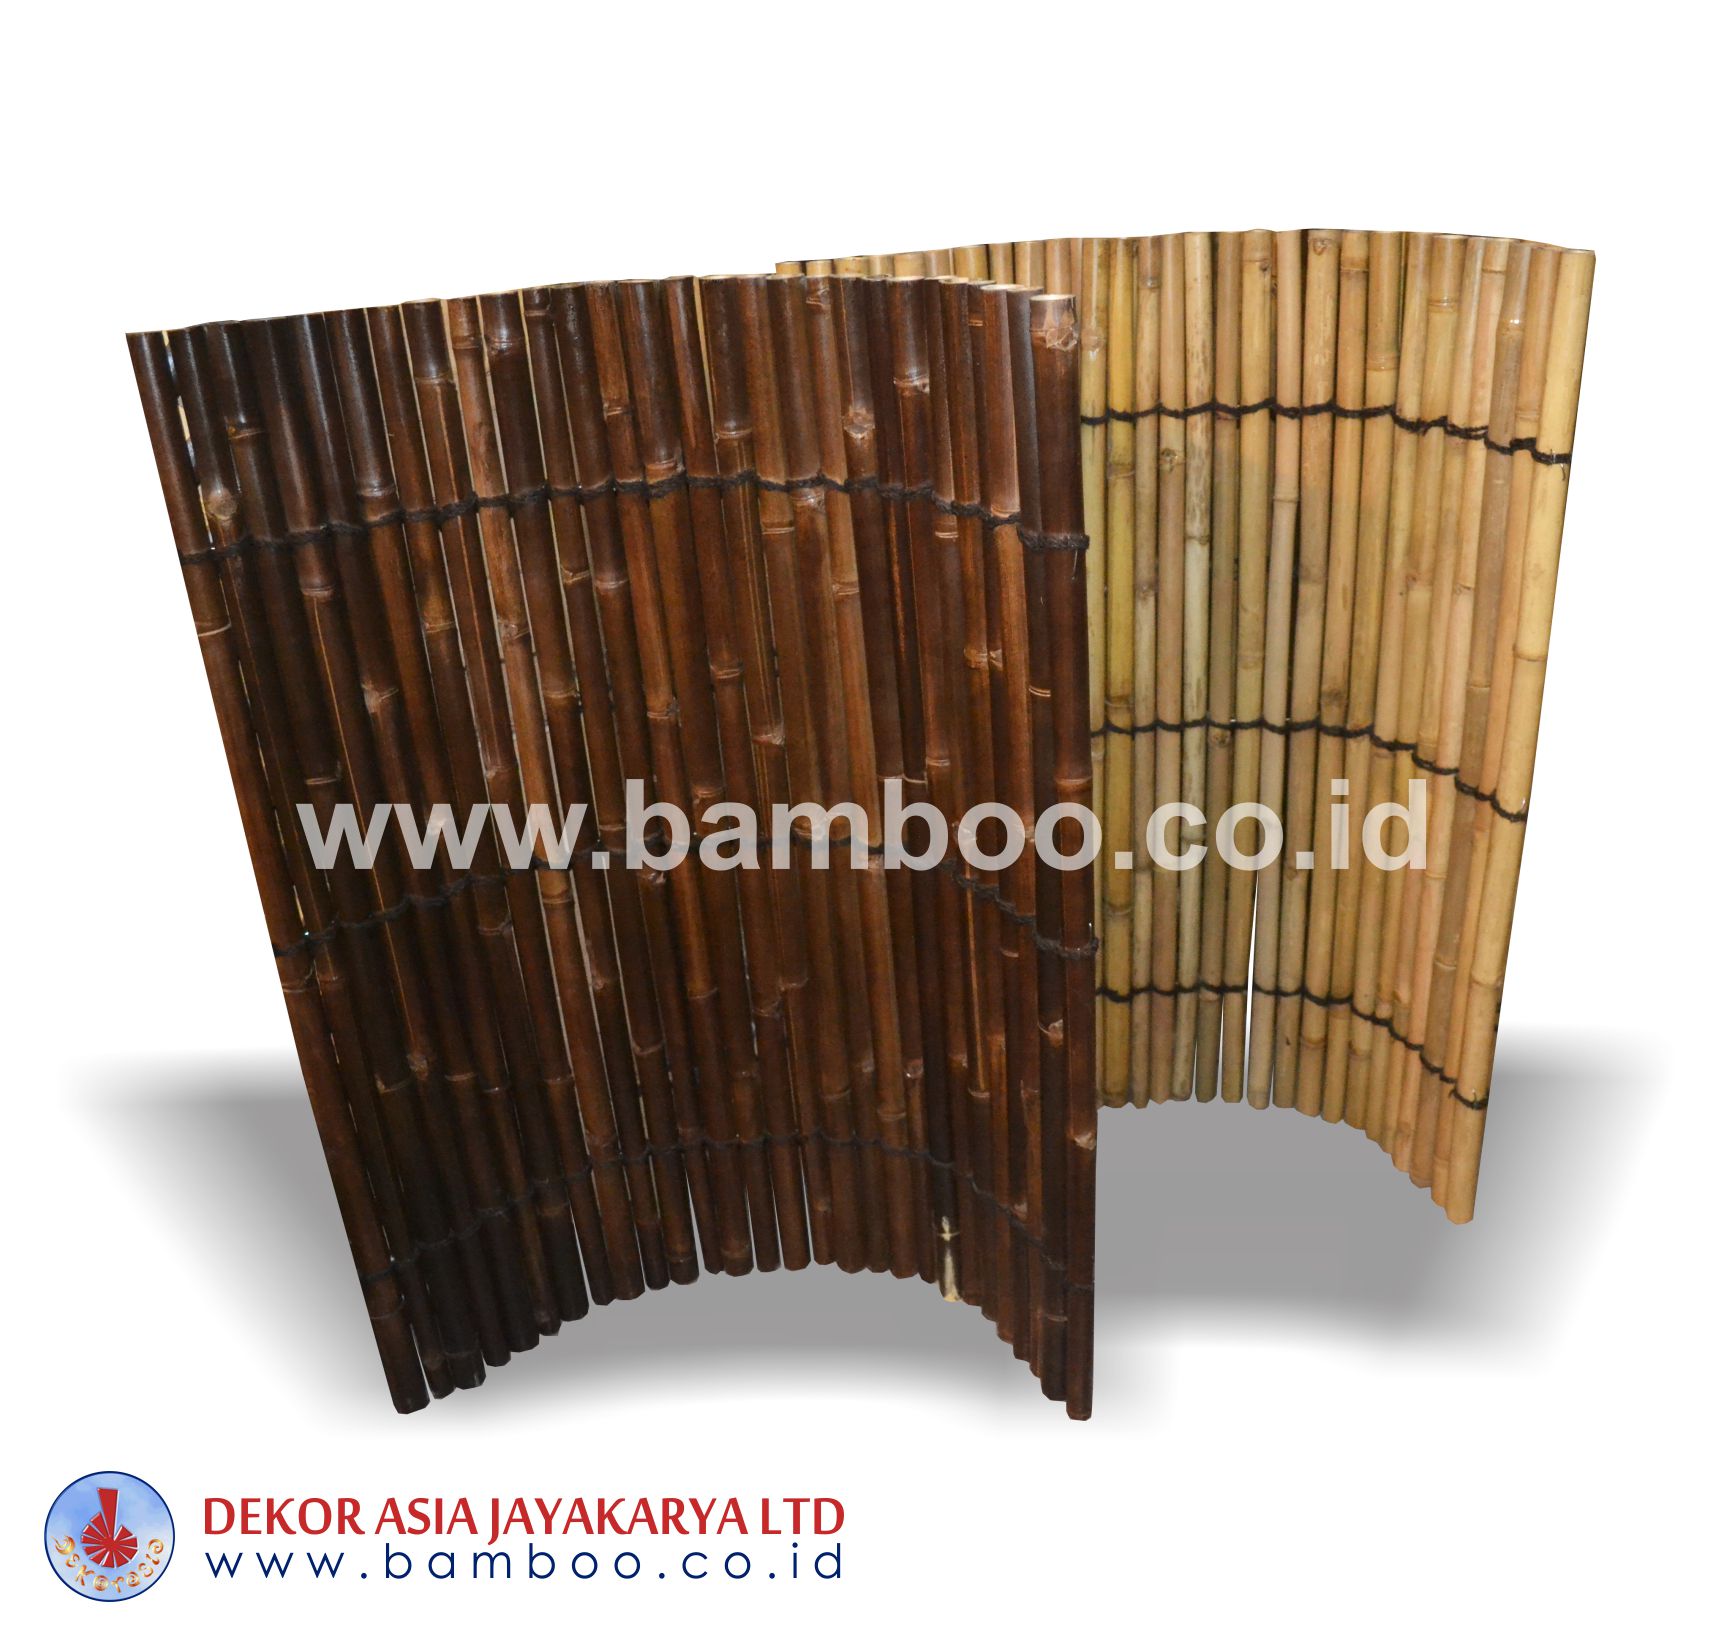 Full Round Roll Bamboo Fences